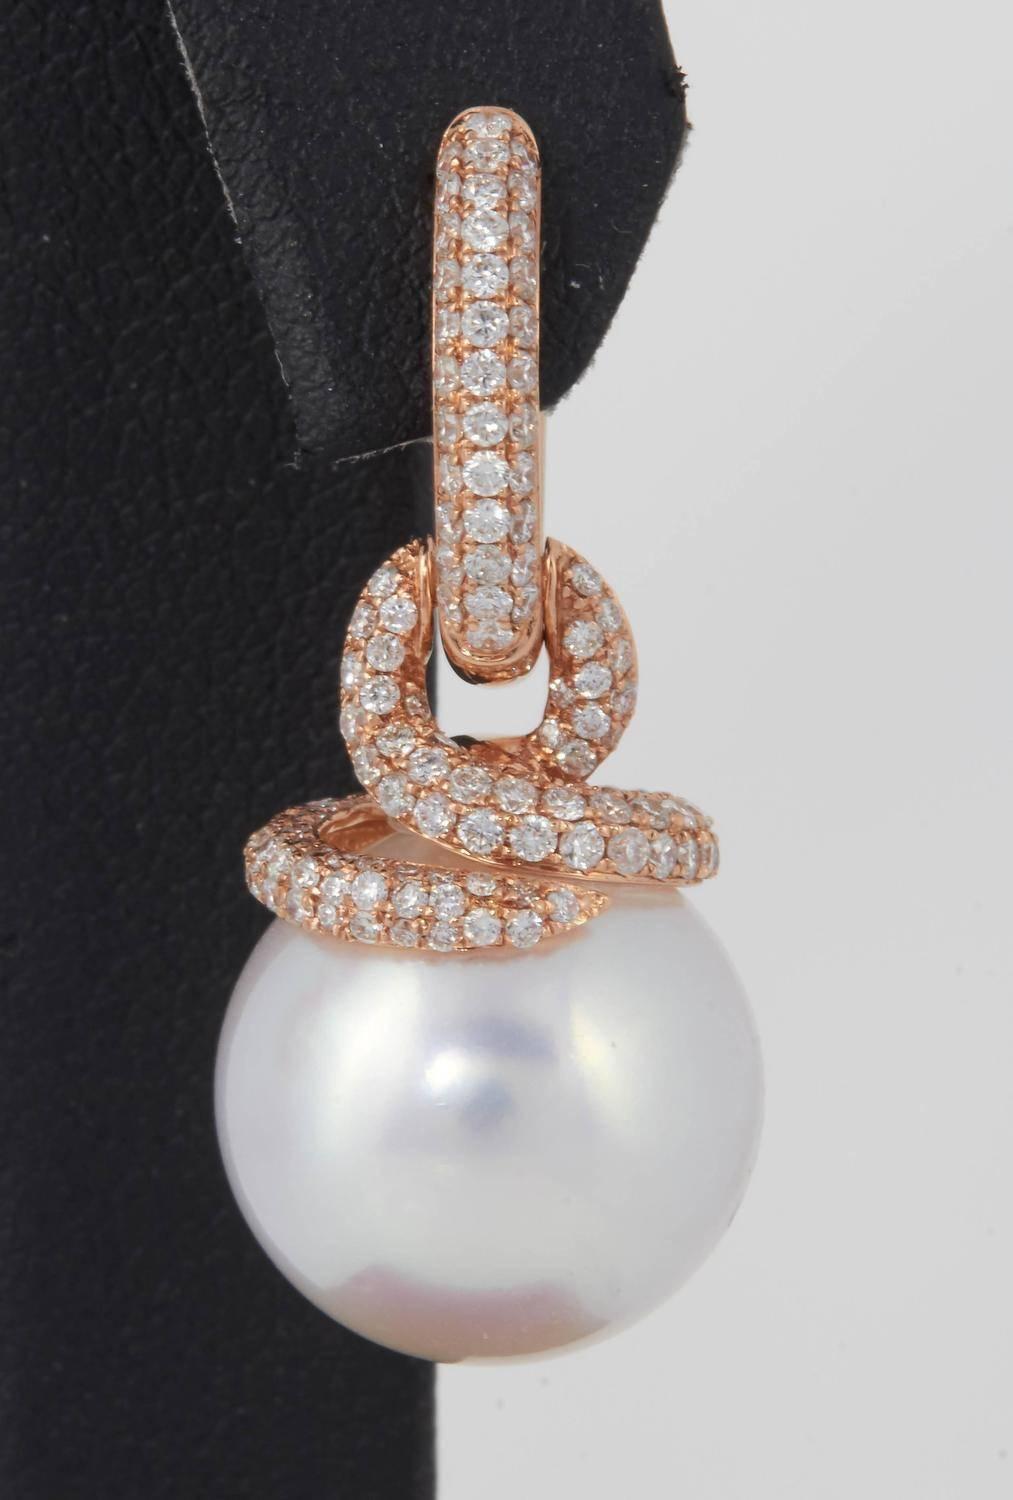 18K White Gold drop earrings featuring two South Sea Pearls measuring 14-15 mm flanked with numerous diamonds weighing 1.55 carats. 

Available in white gold. 